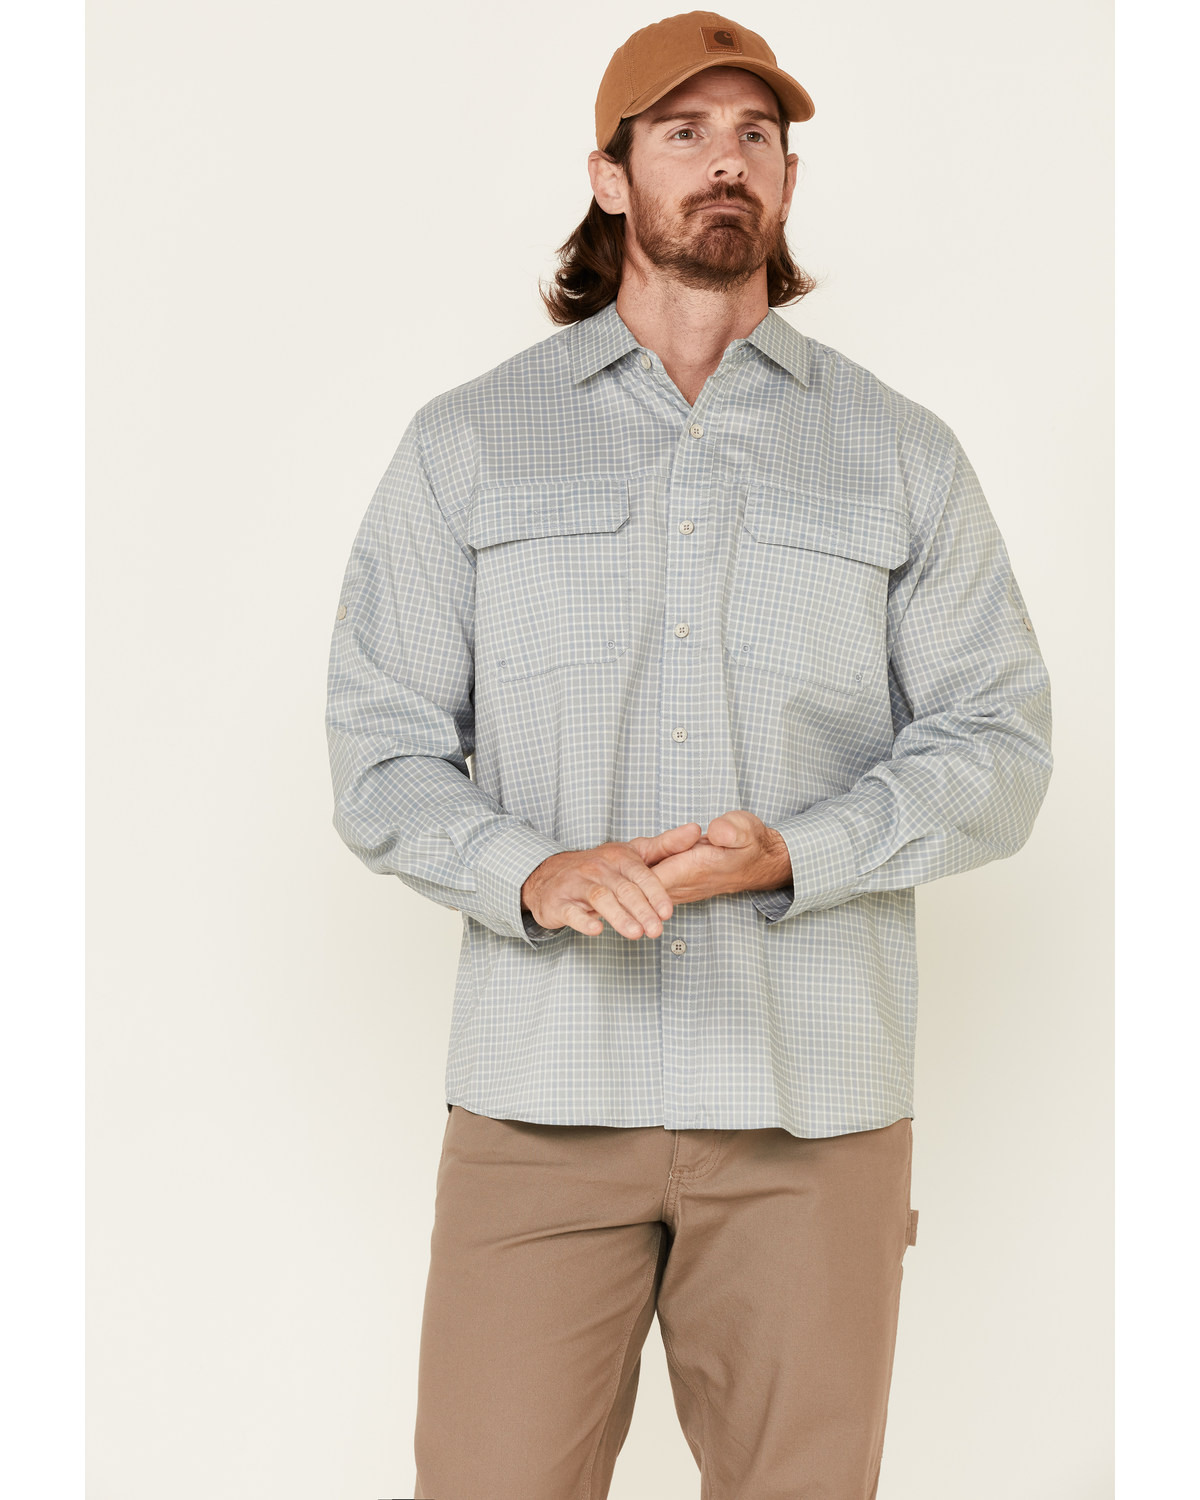 North River Men's Solid Utility Outdoor Long Sleeve Button Down Western Shirt